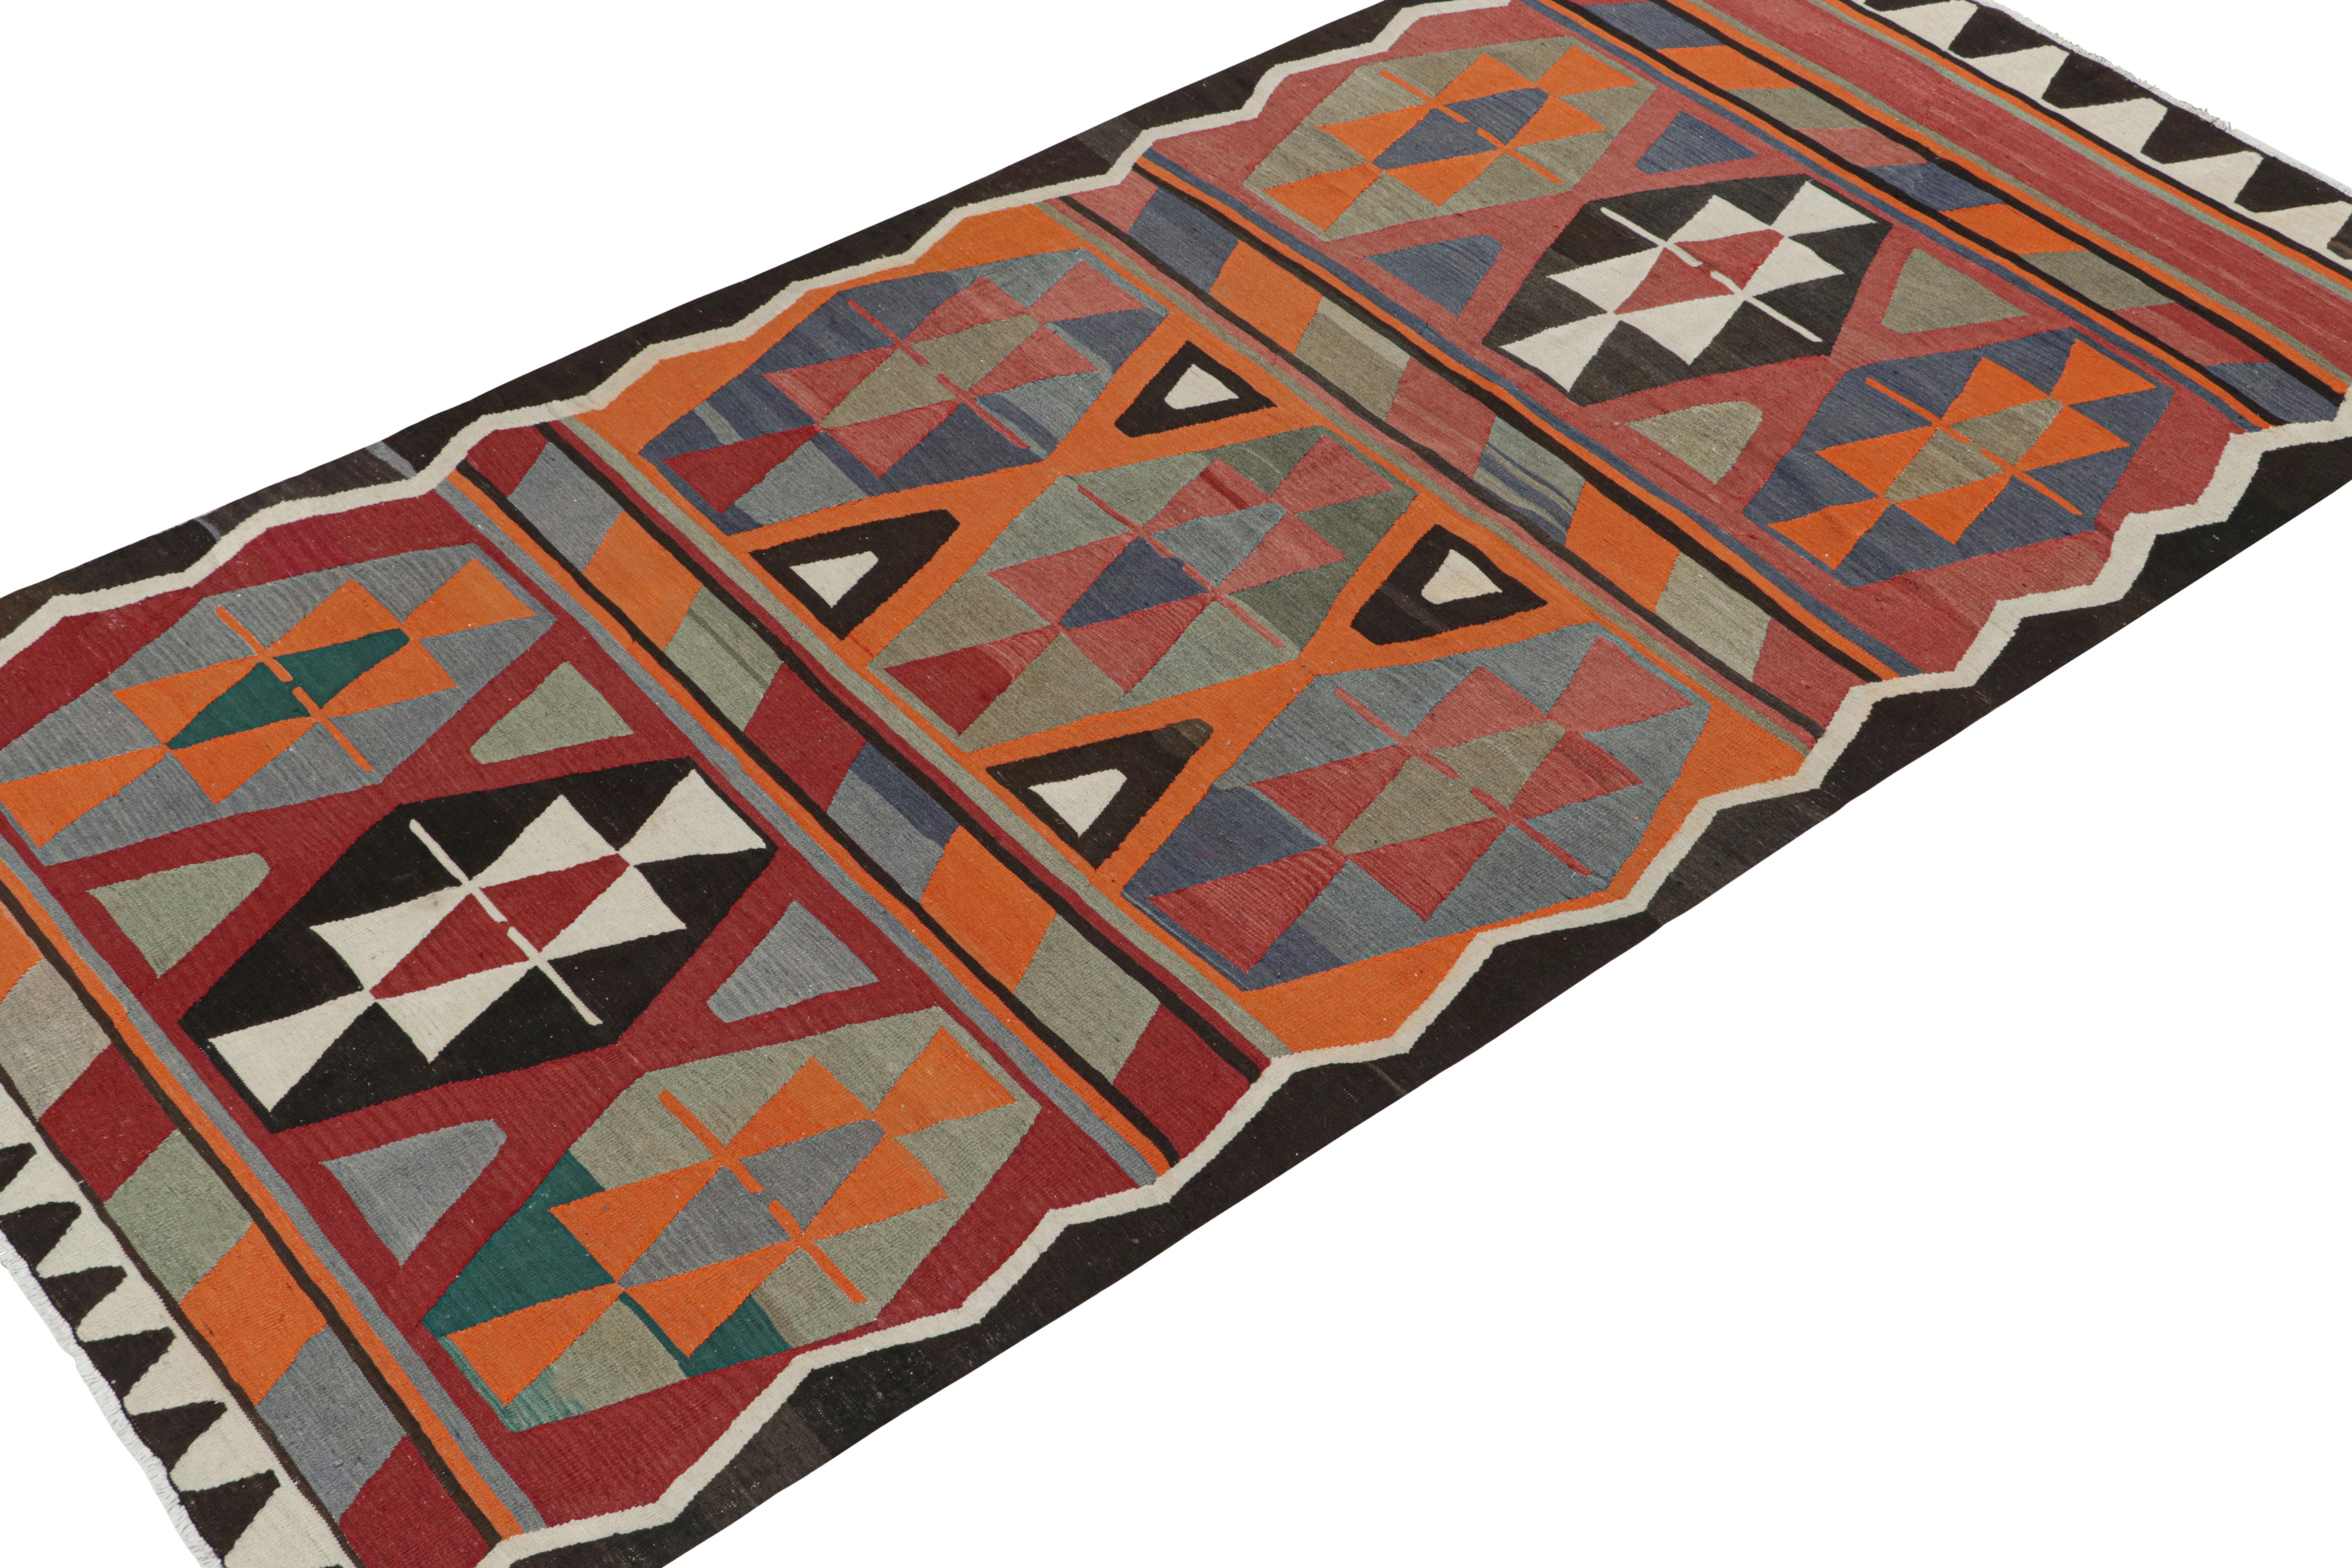 Tribal Vintage Persian Kilim with Polychromatic Geometric Patterns by Rug & Kilim For Sale